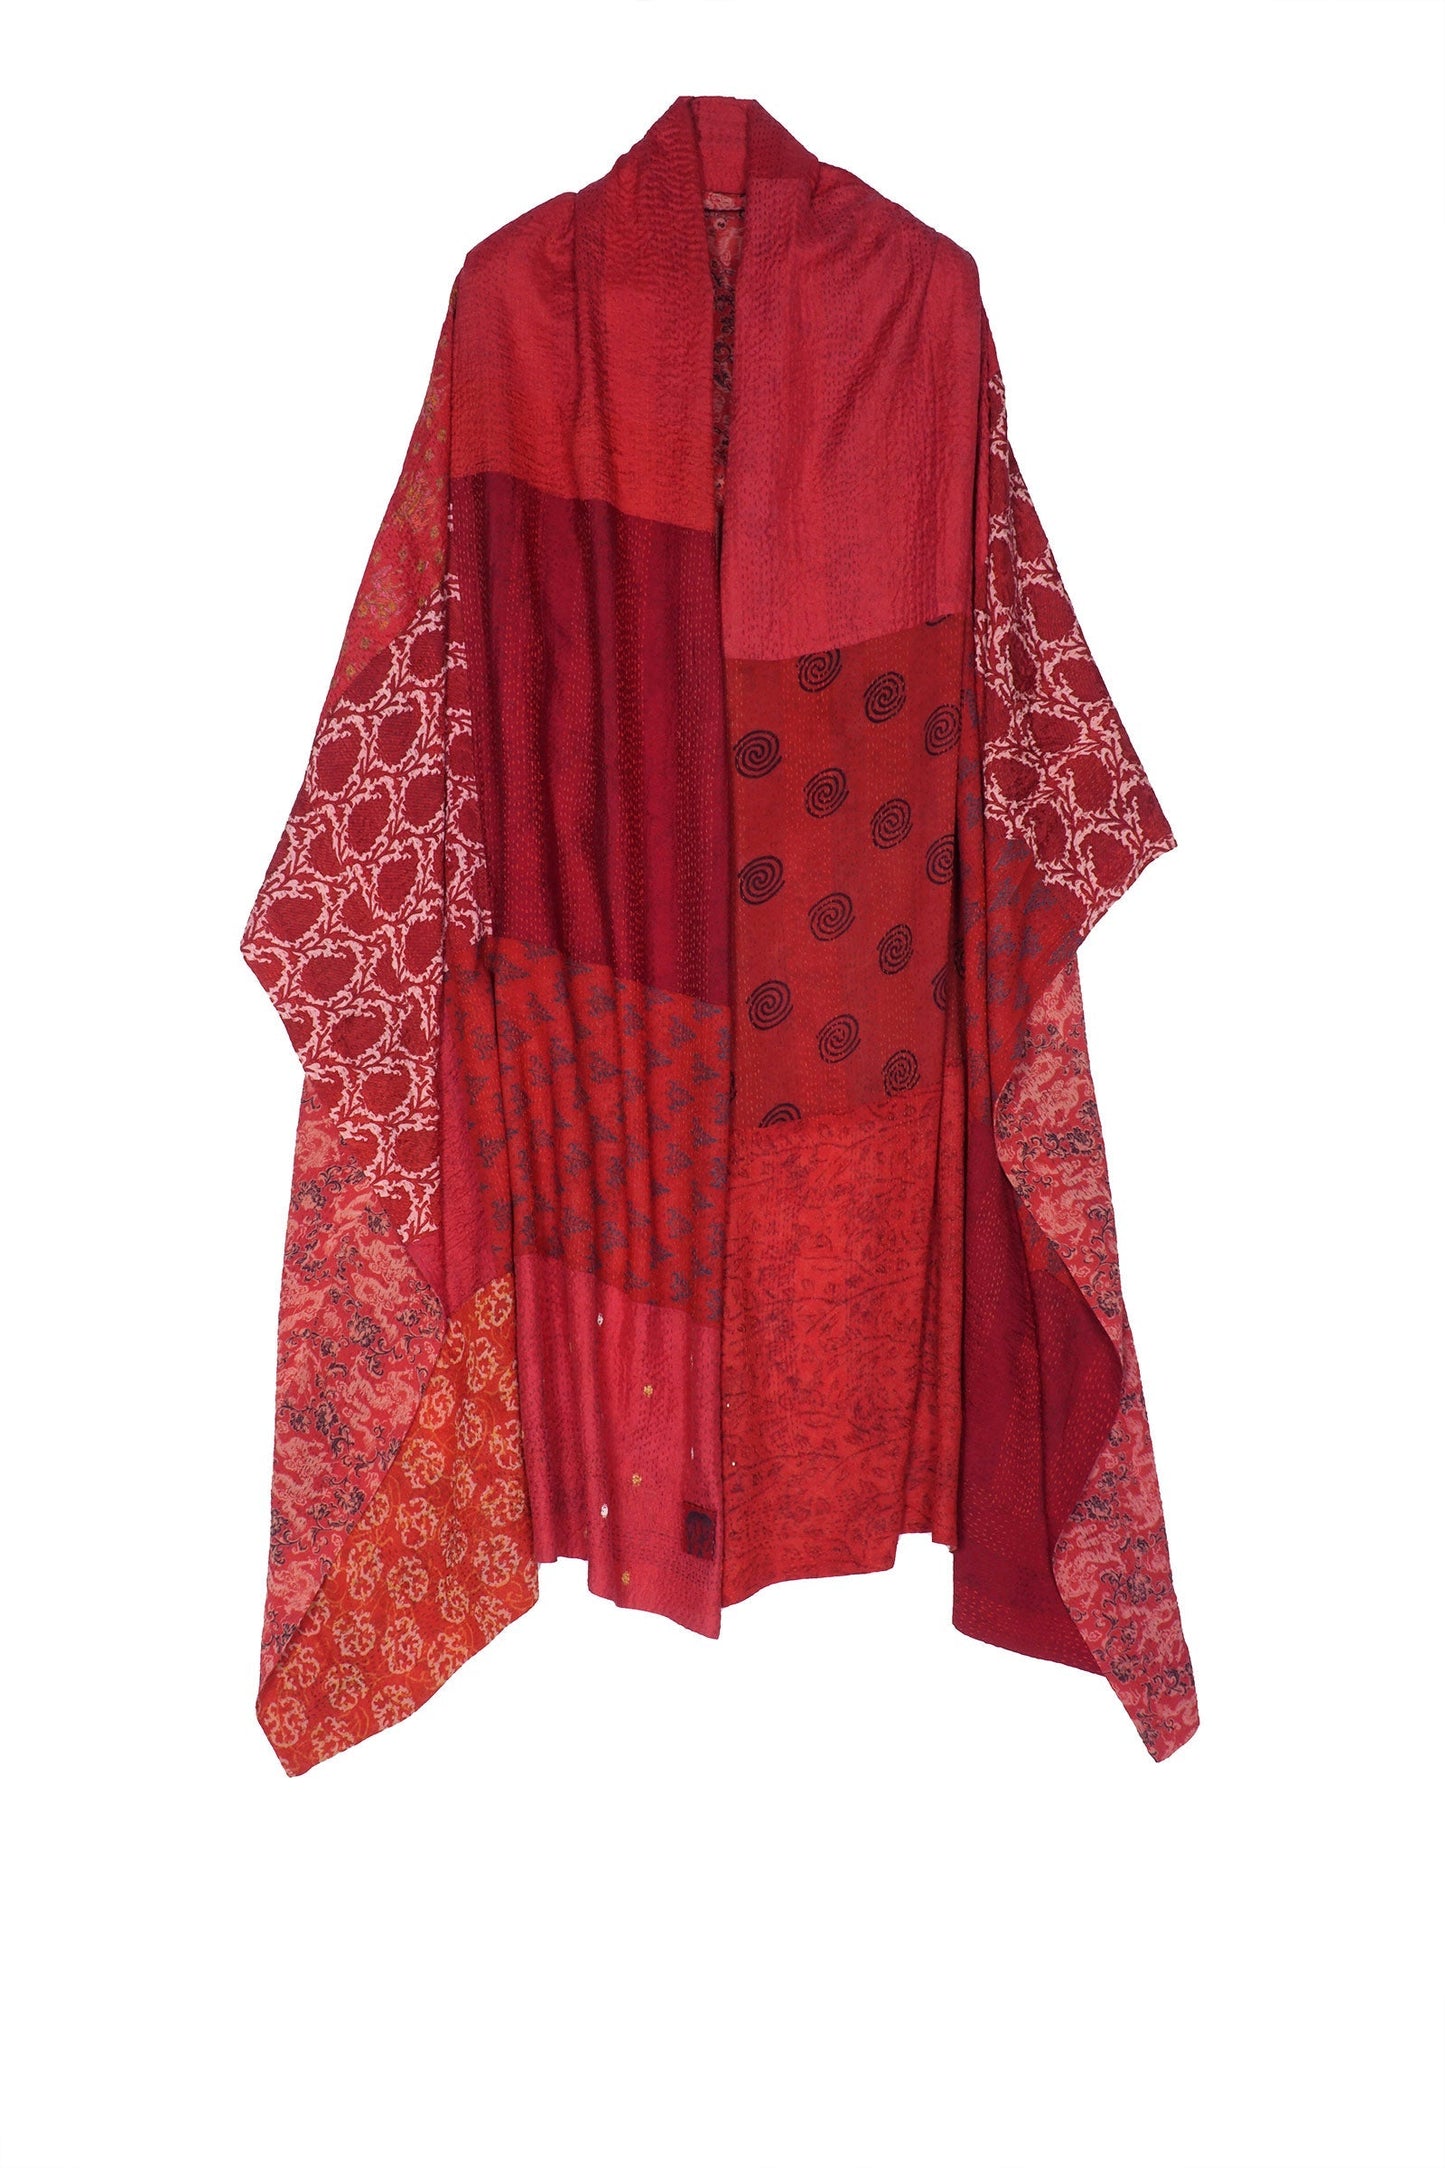 GEORGETTE VINTAGE SILK PATCH KANTHA SHAWL LARGE - gs2803-red -